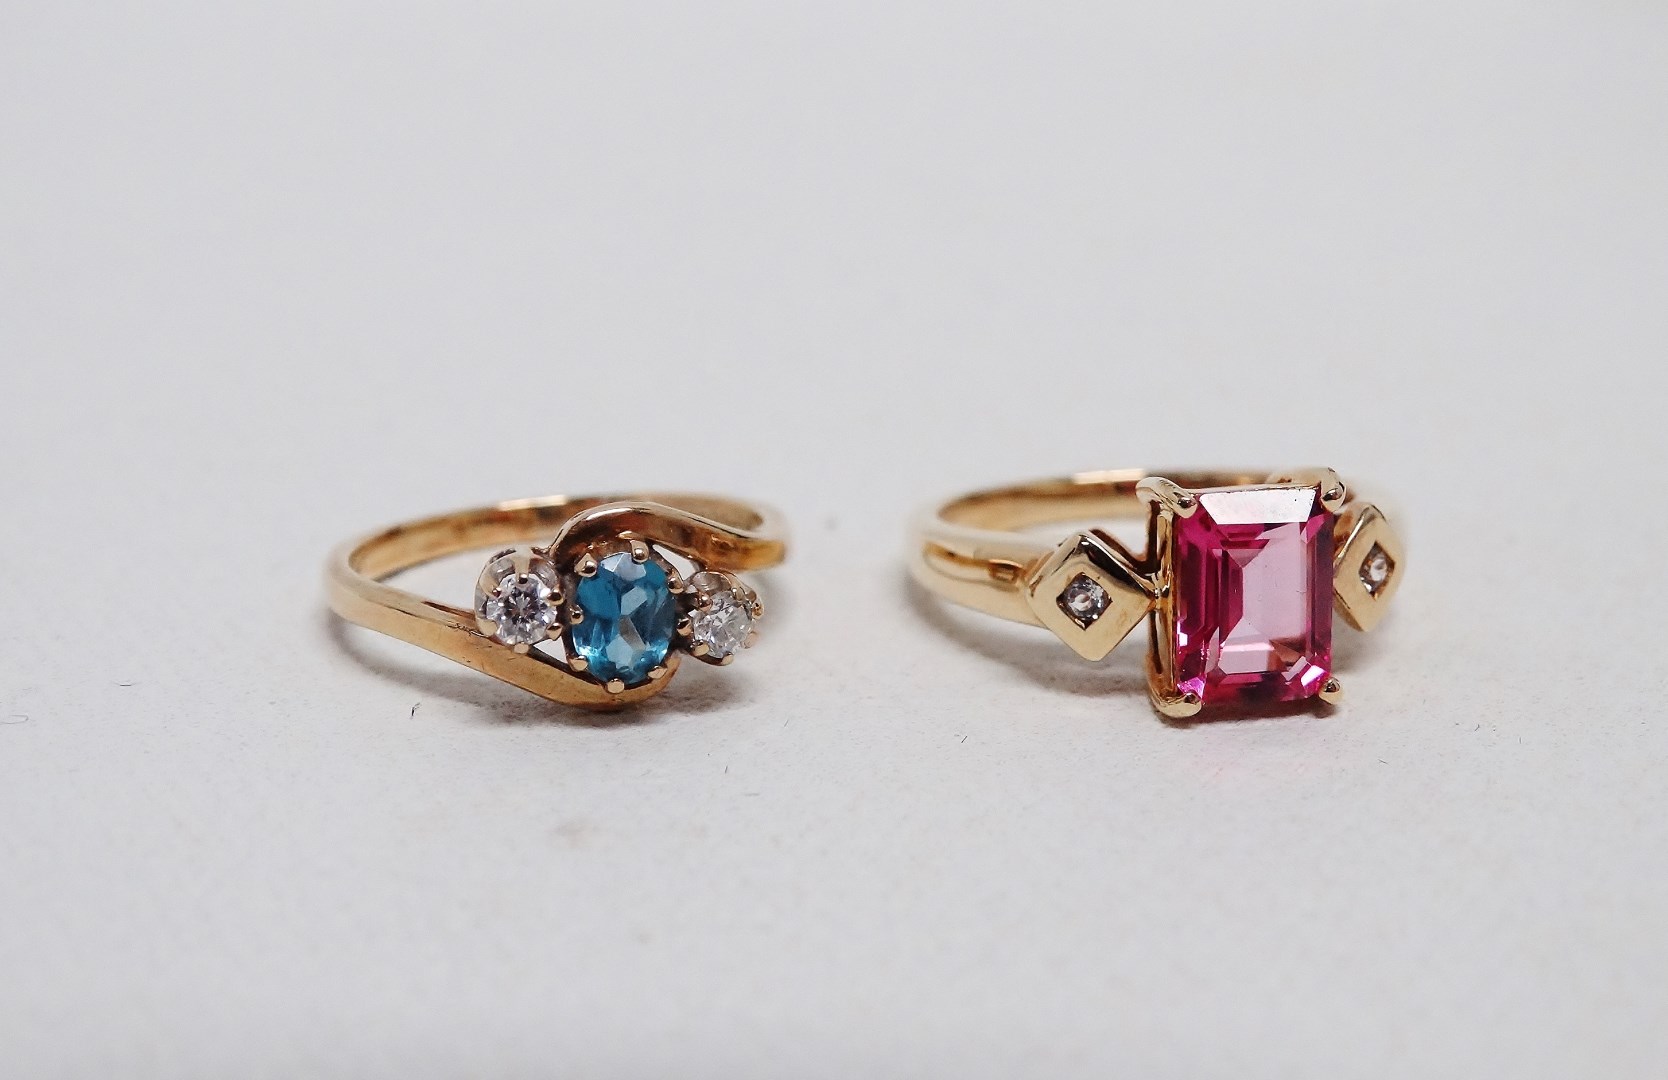 A pink tourmaline and diamond dress ring - the emerald cut central stone flanked by diamonds on a